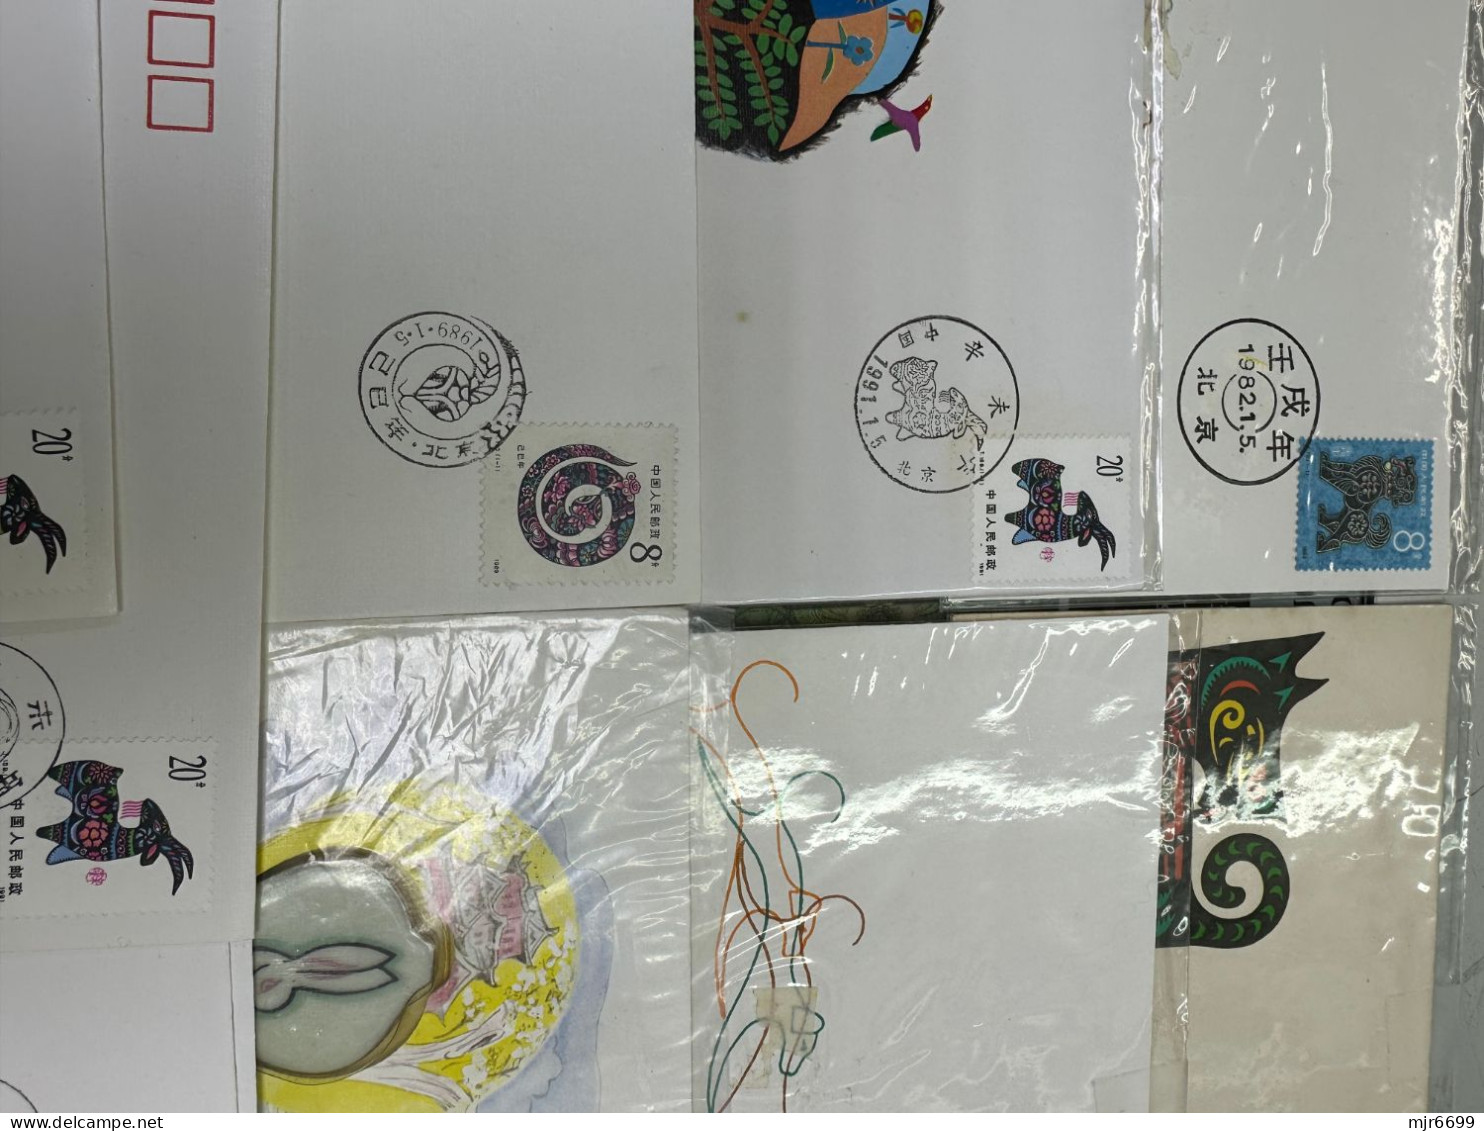 CHINA LOT OF LUNAR NEW YEAR FDC, SOME COMBINE ISSUE WITH UNITED STATES OF AMERICA - 1980-1989